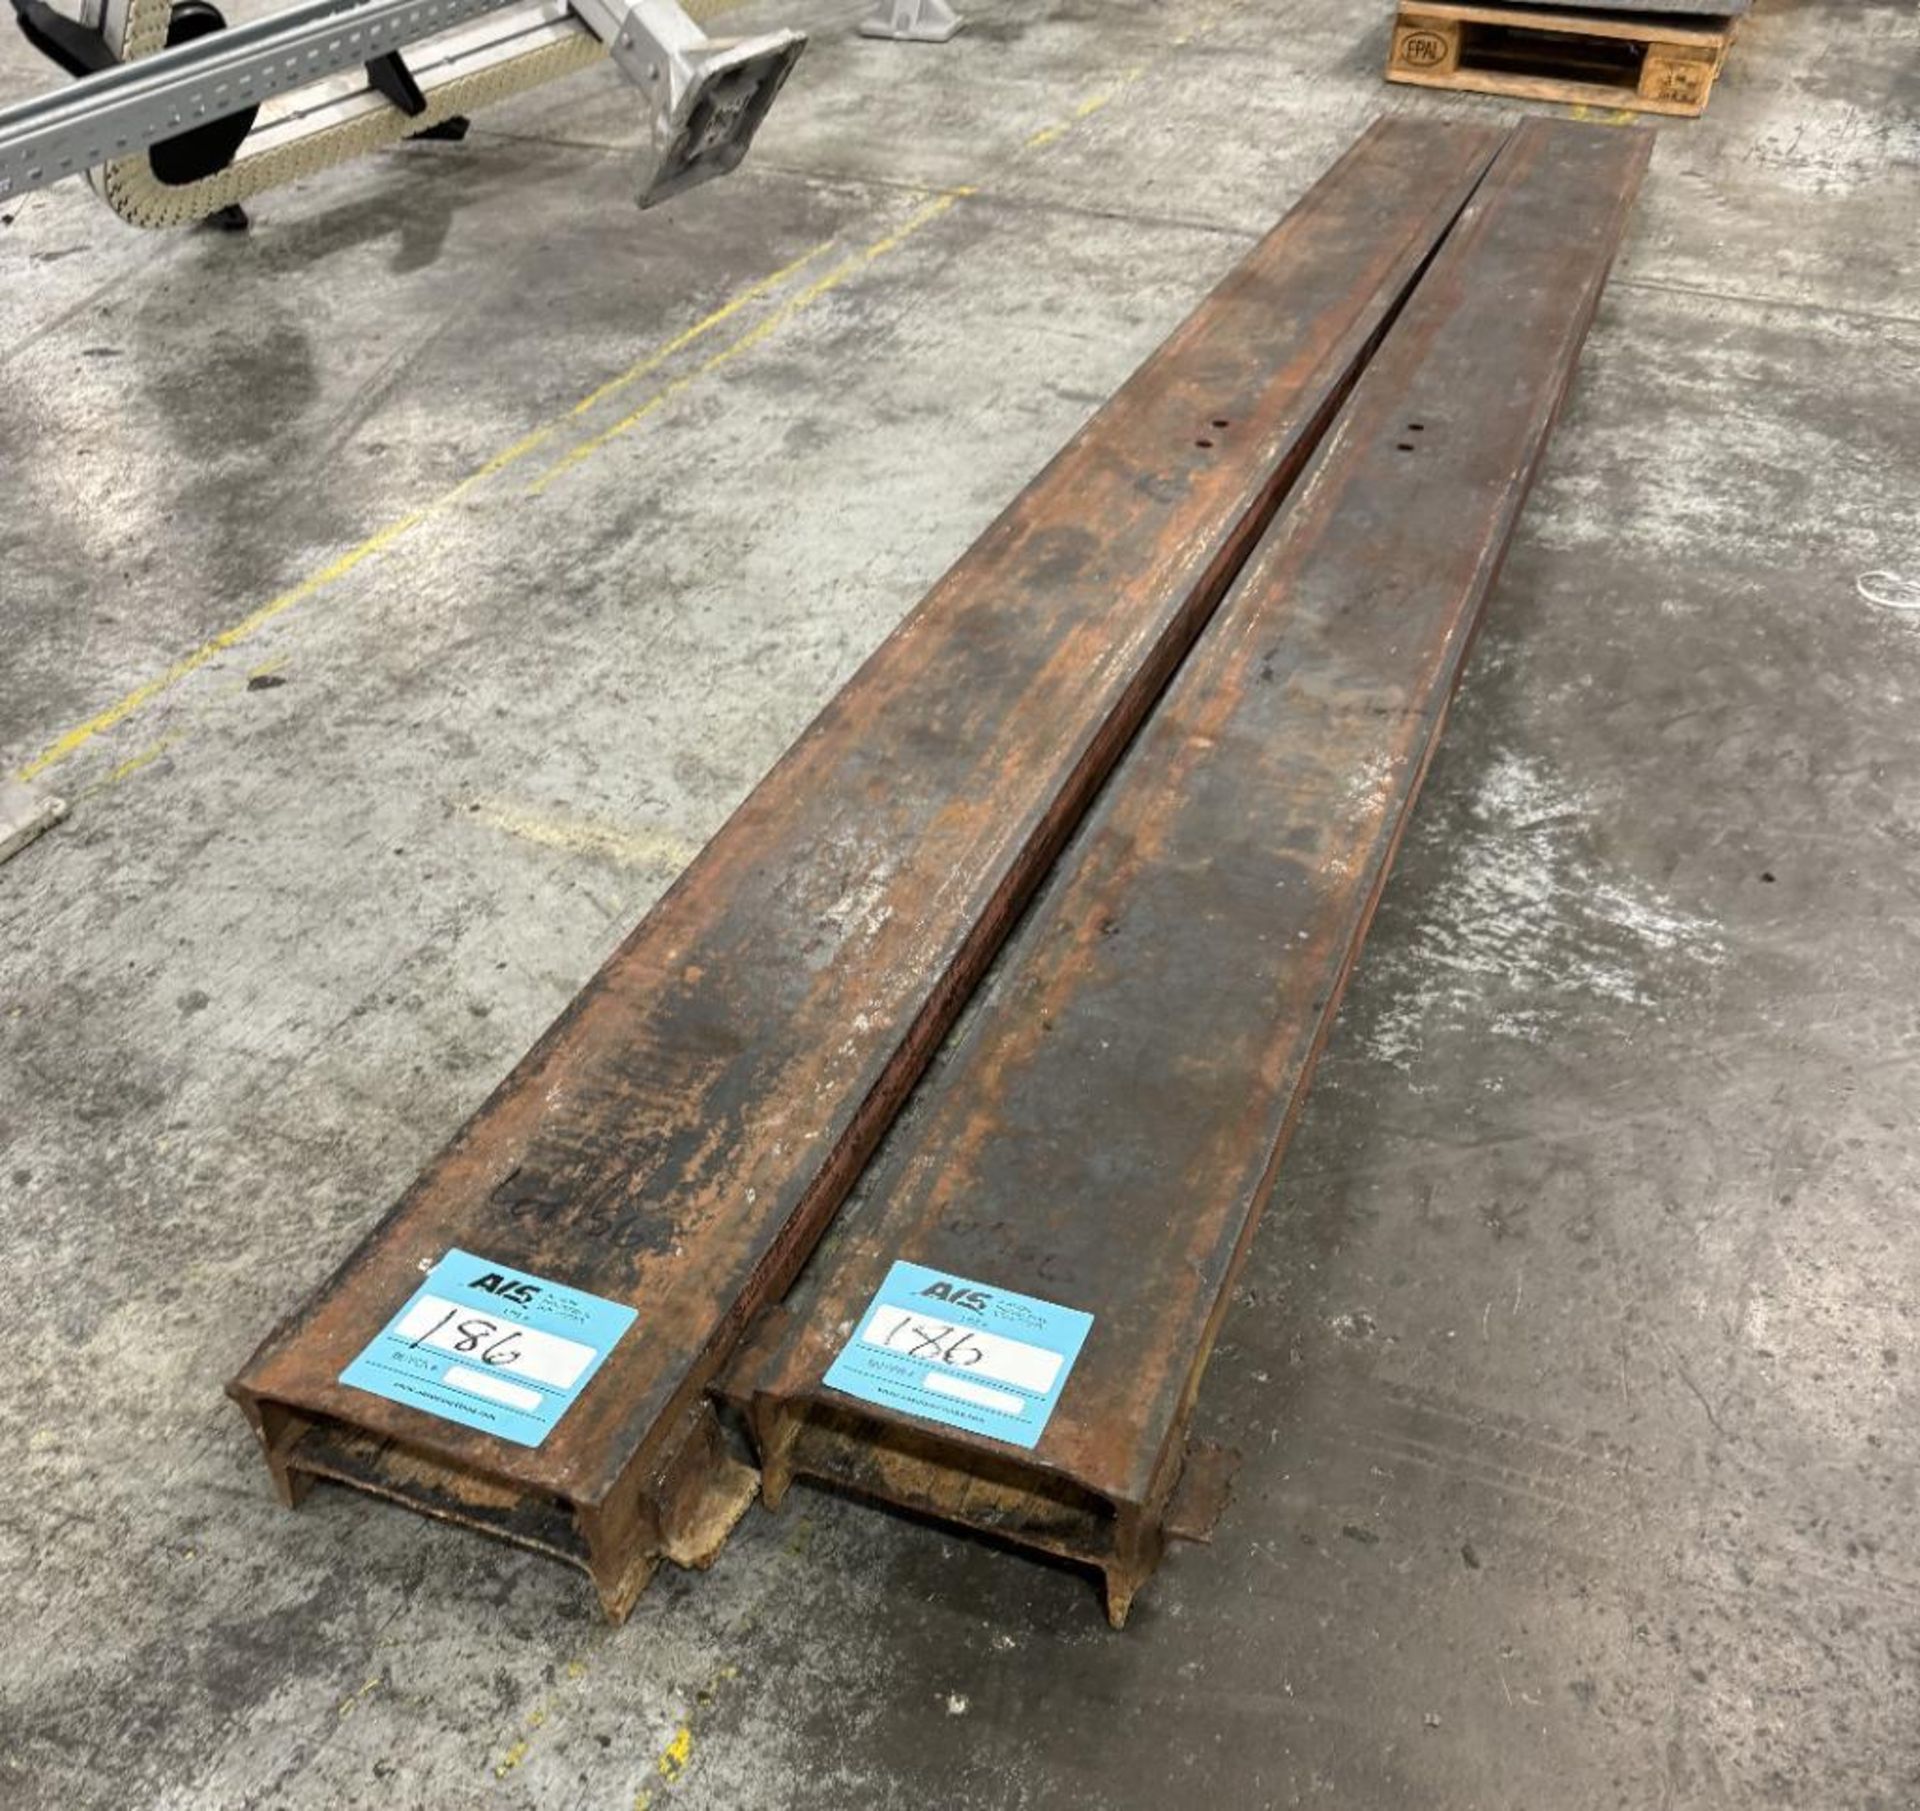 Lot Consisting Of: (2) Heavy Duty Fork Extensions, approximate 10" wide x 140" long, (1) metal ramp.